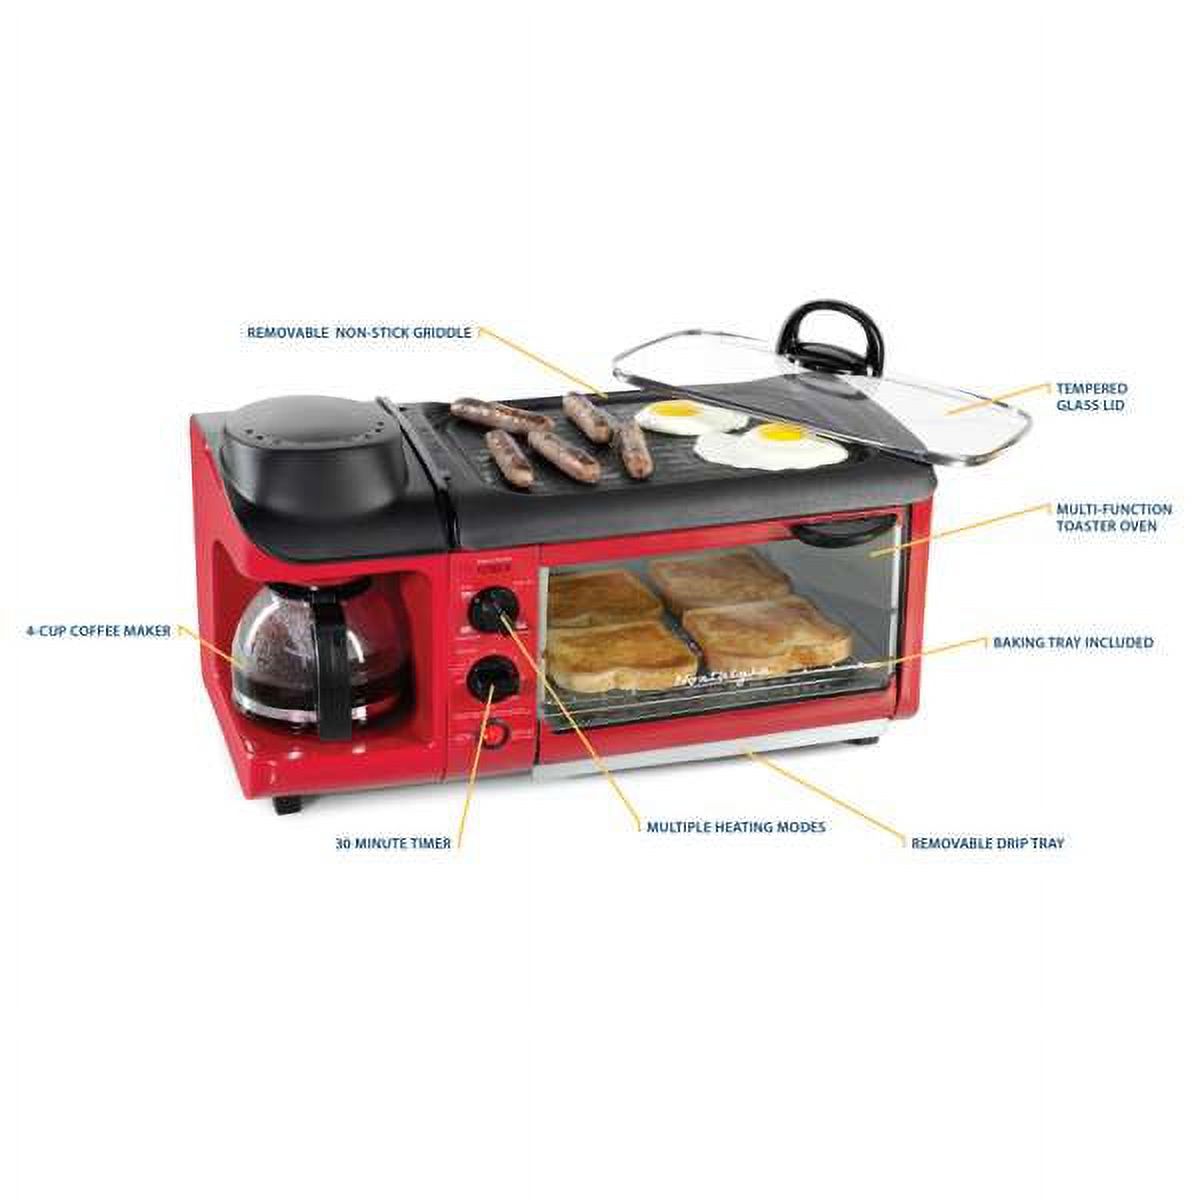 Nostalgia BST3RR Retro 3-in-1 Family Size Electric Breakfast Station, Coffeemaker, Griddle, Toaster Oven - Retro Red - image 7 of 7